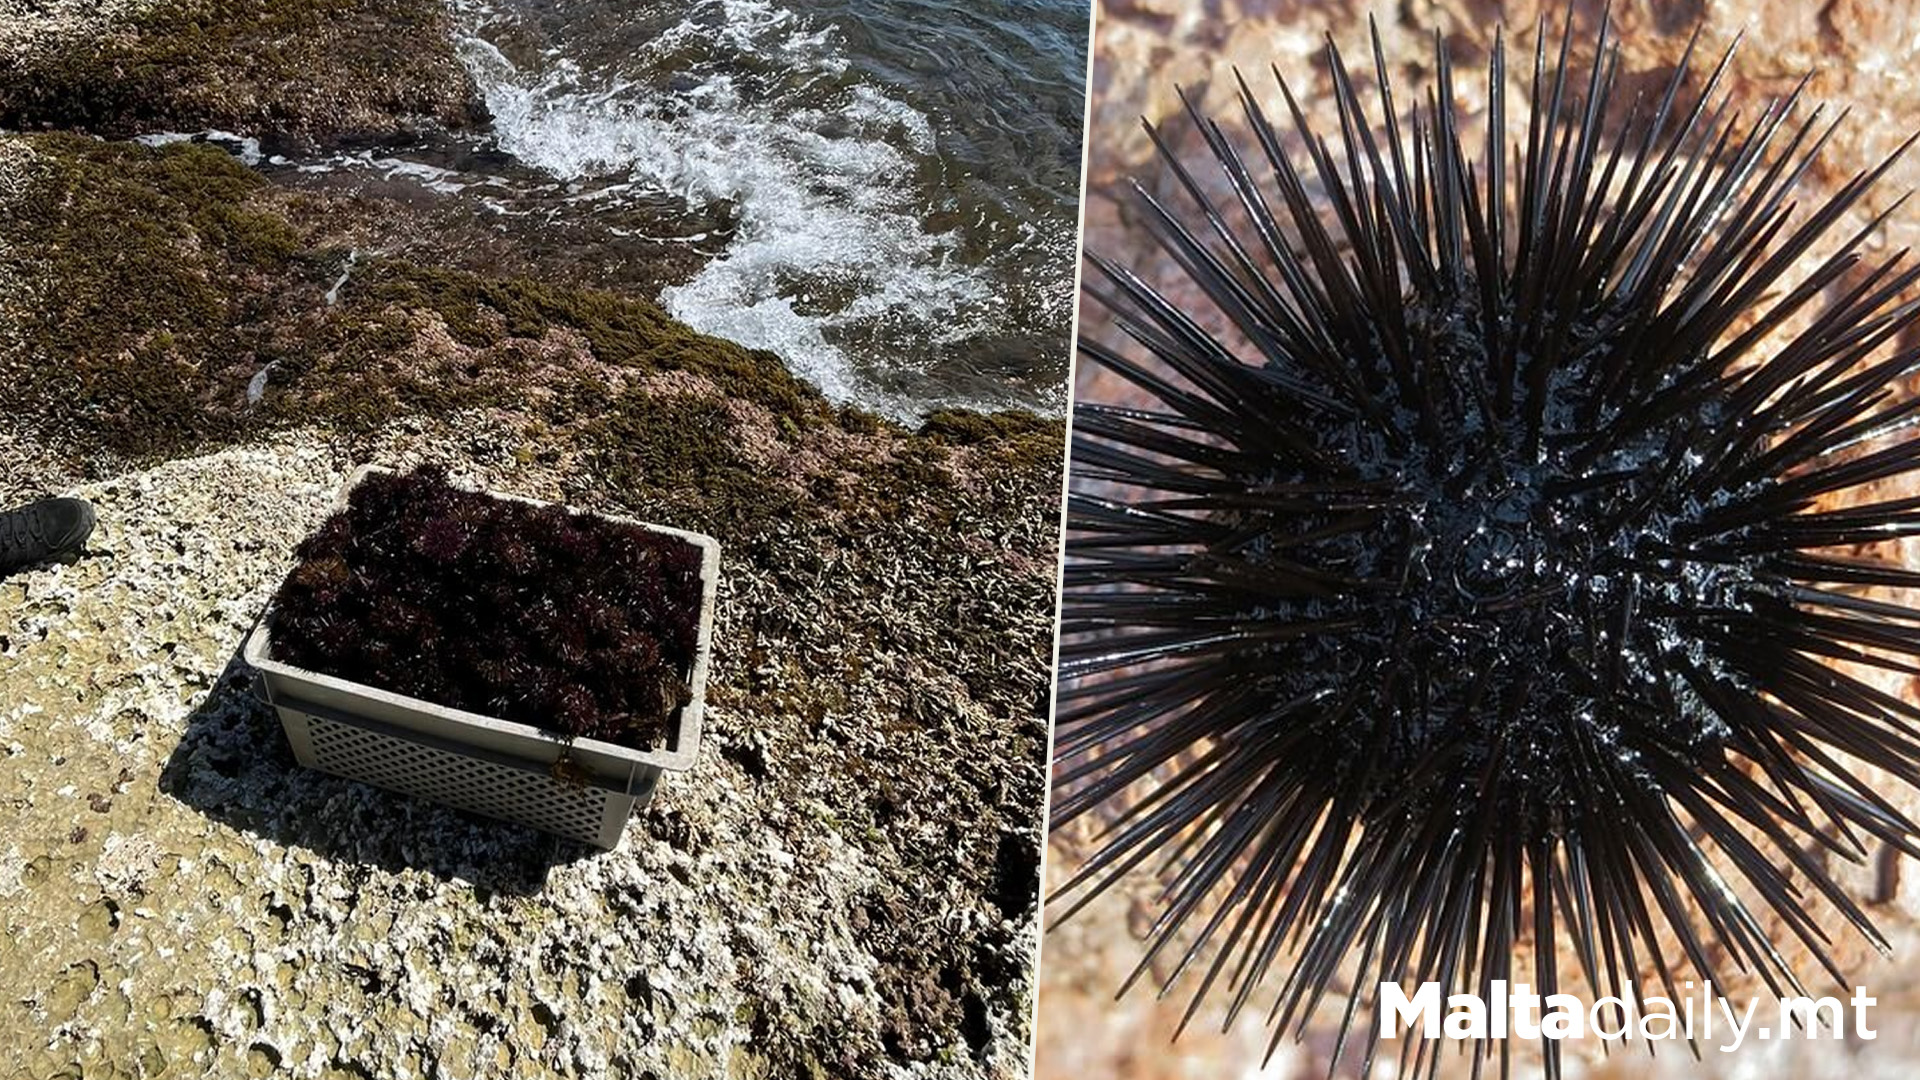 Man Caught Illegally Collecting Over 1000 Sea Urchins